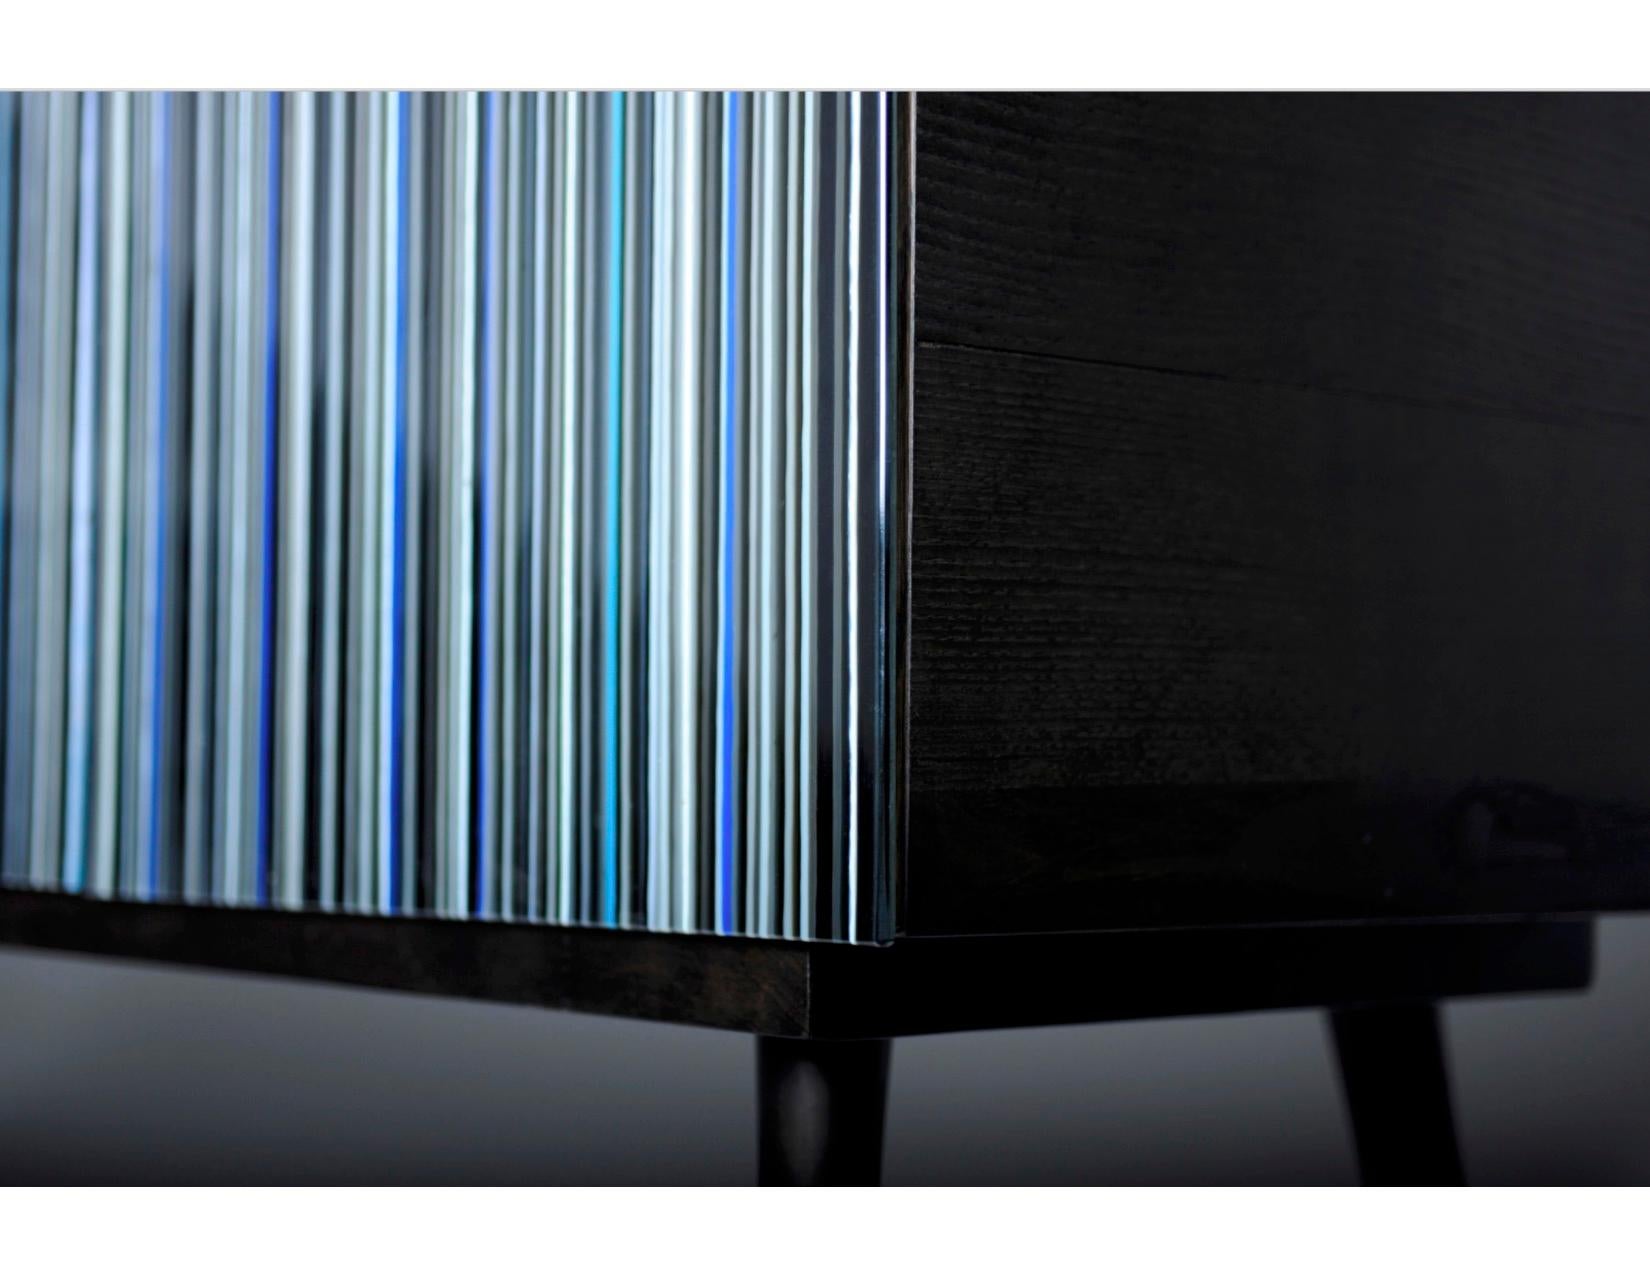 Lacquered Retro Style Buffet Credenza Blue Hues Multicolor Barcode Glass Design For Sale